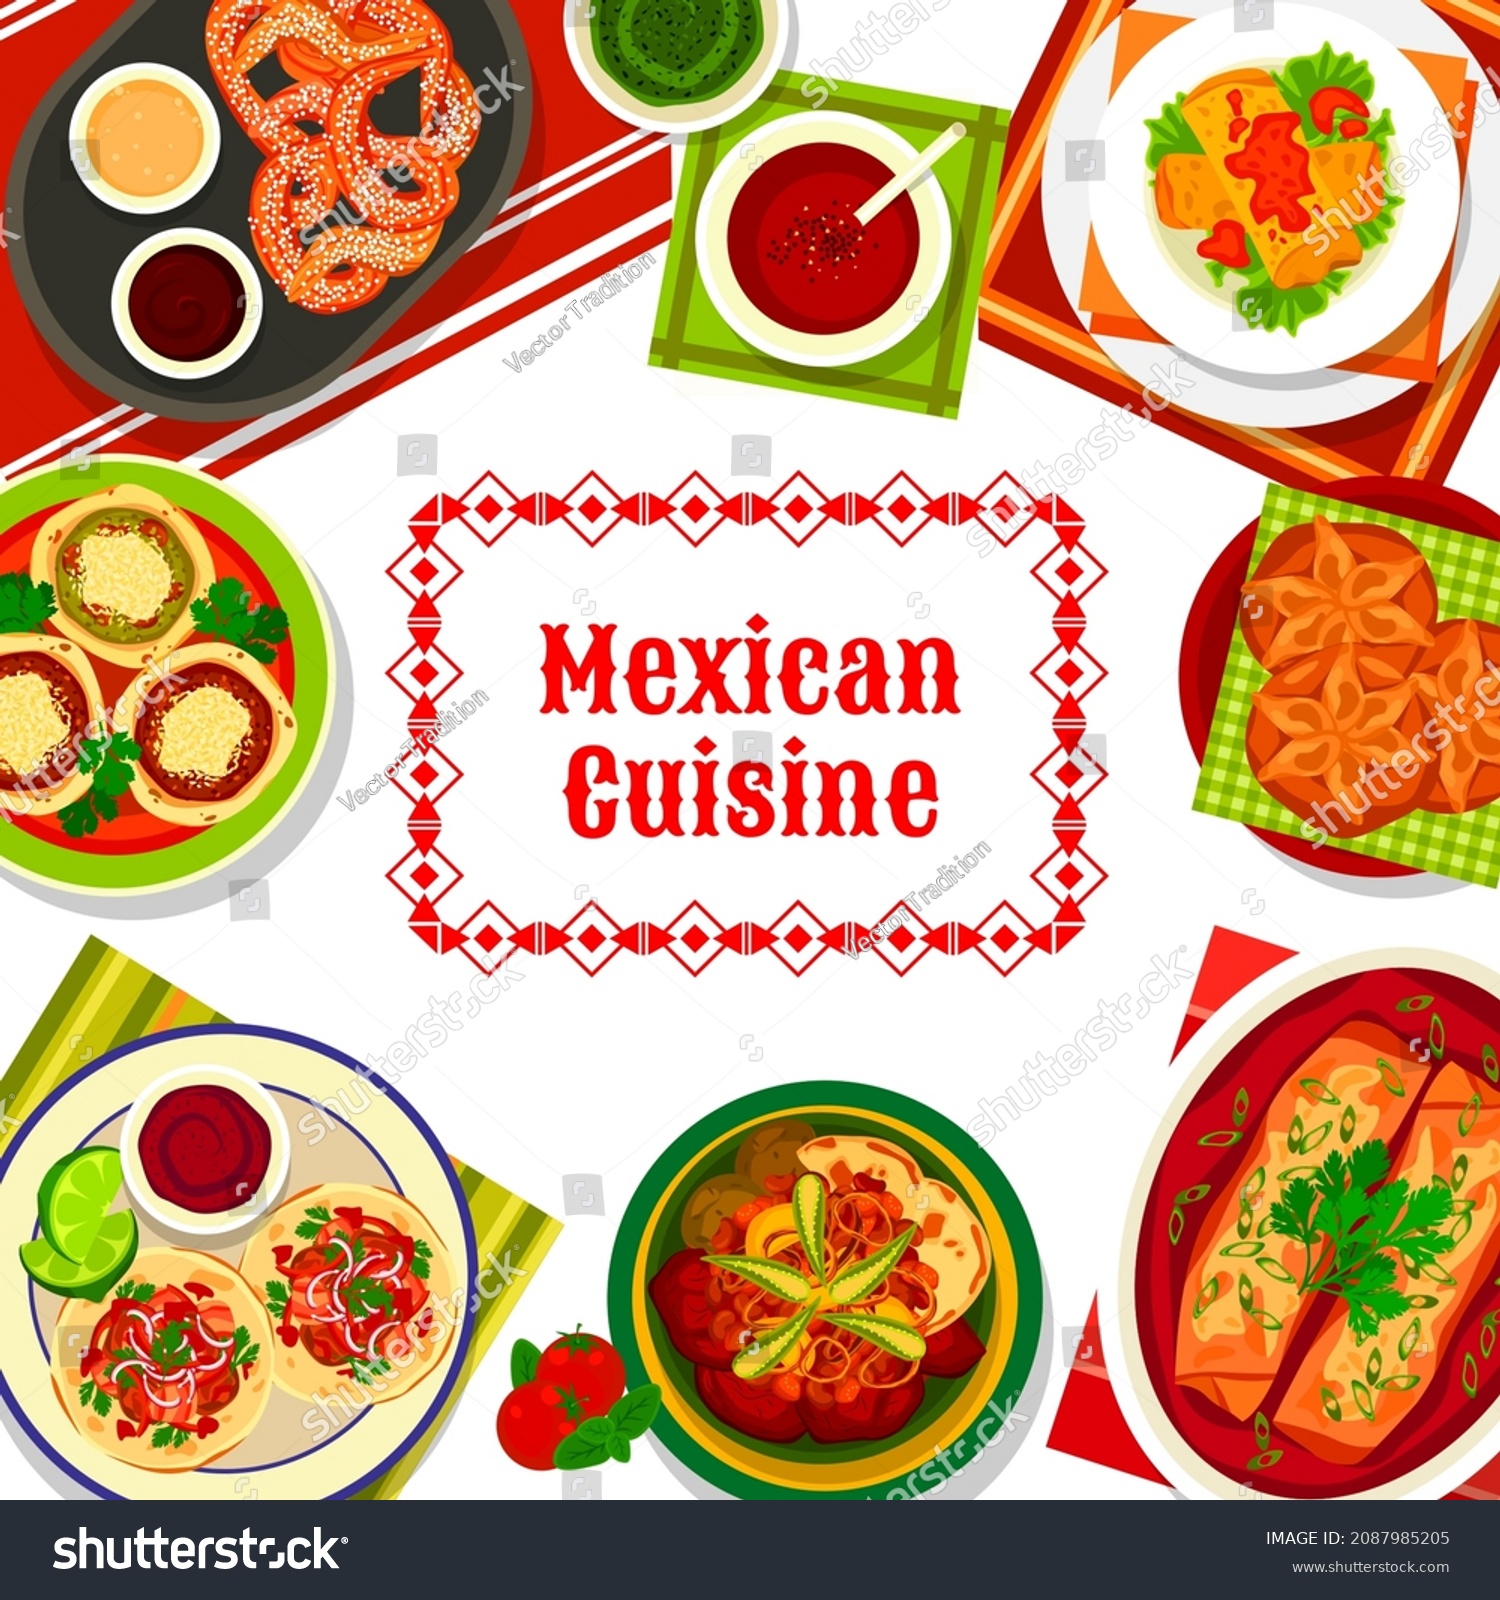 SVG of Mexican cuisine food, Mexico dishes and meals menu, vector burritos and tacos. Mexican food traditional dinner and spicy salsa sauces for chicken enchilada, meat stew molcajetes and chimichanga svg